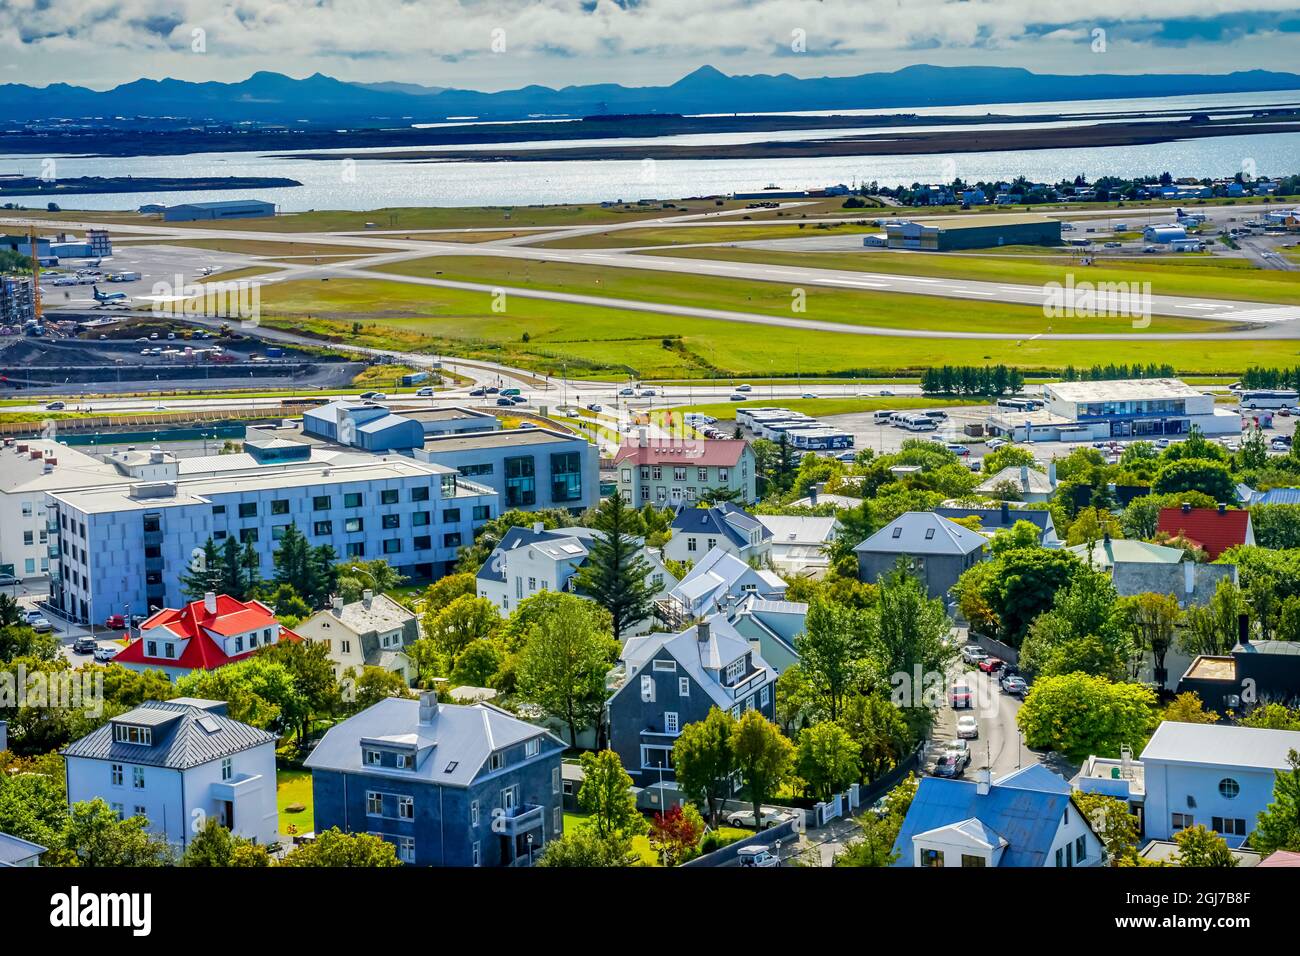 Airport Ocean Colorful red blue Houses Cars Streets, Reykjavik, Iceland. Stock Photo